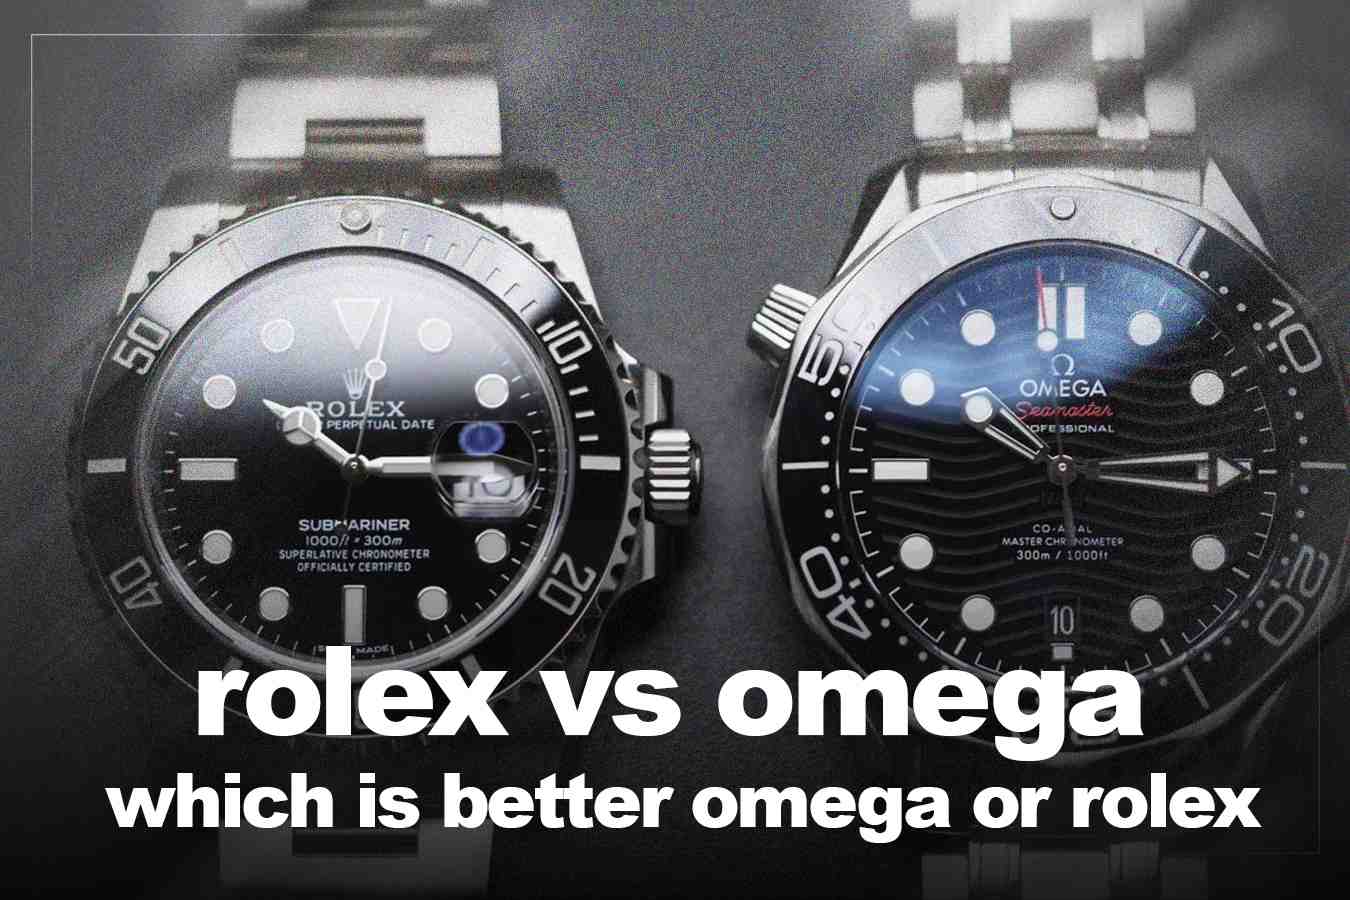 Rolex vs Omega - Which is better omega or rolex